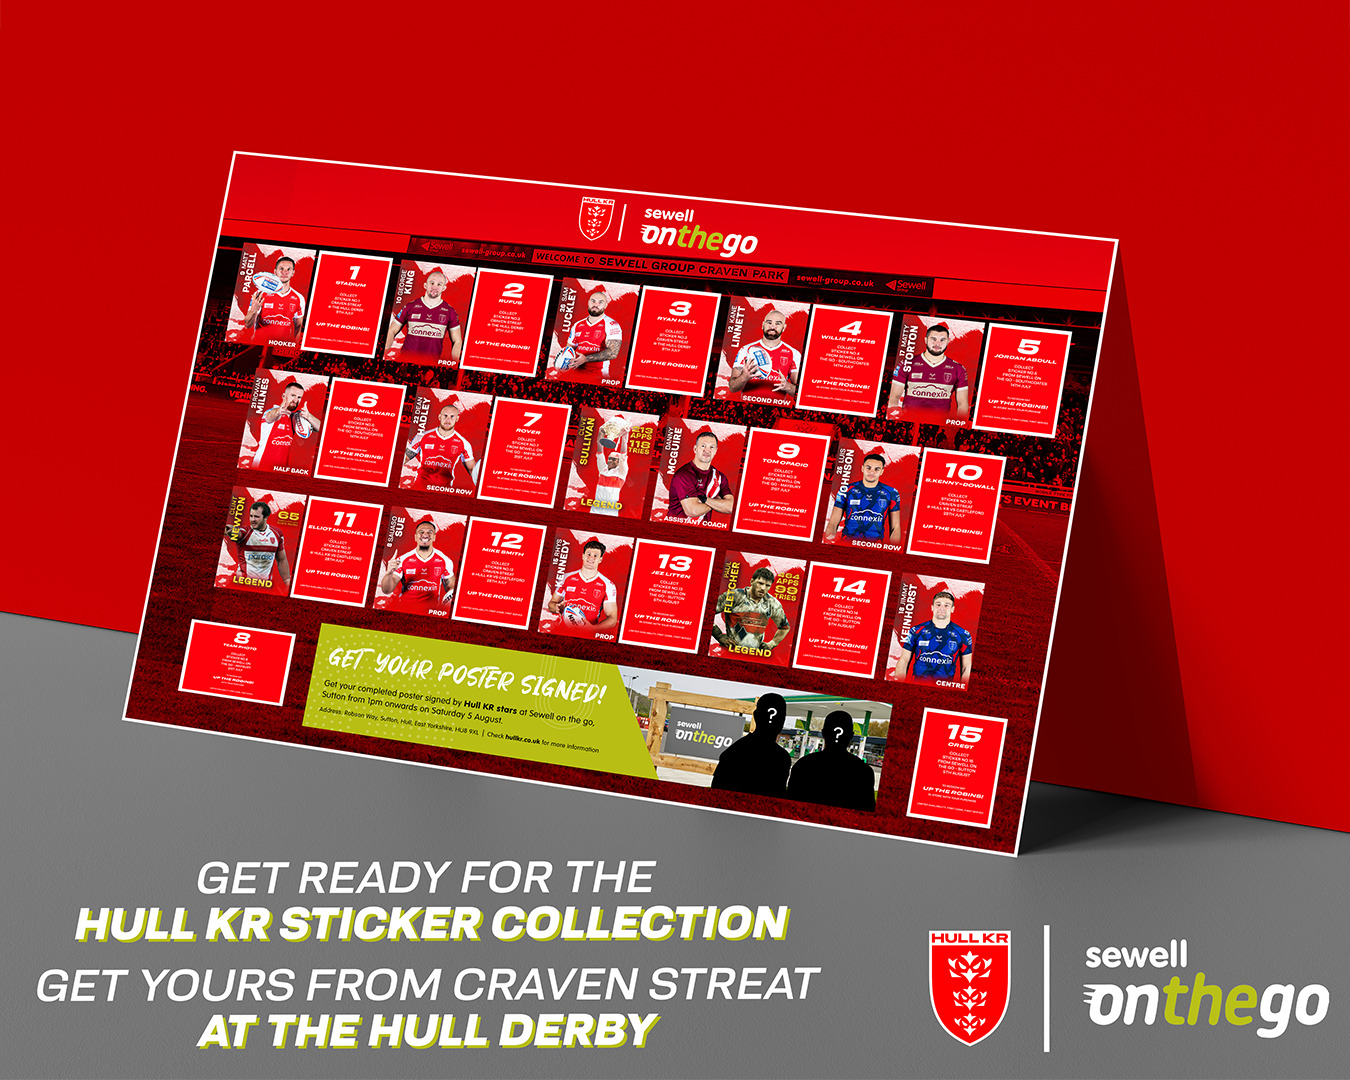 A Hull KR poster with spaces available to add stickers